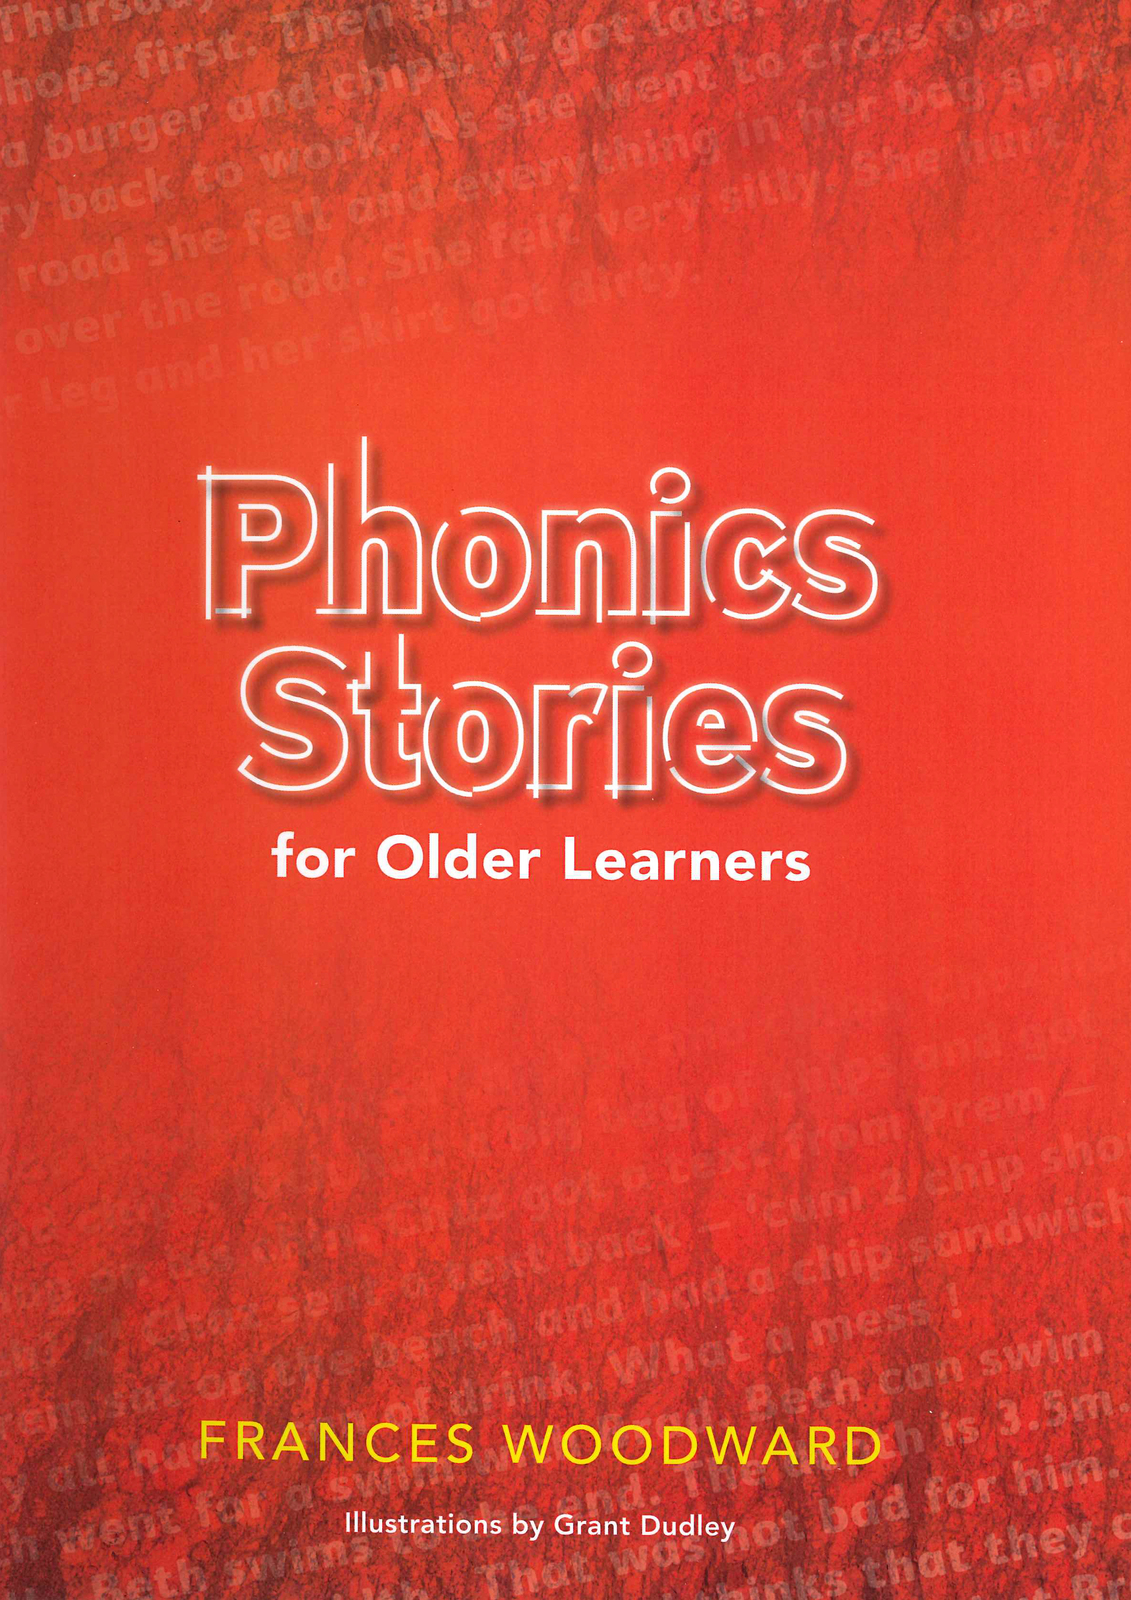 Learners　Phonic　for　Stories　Older